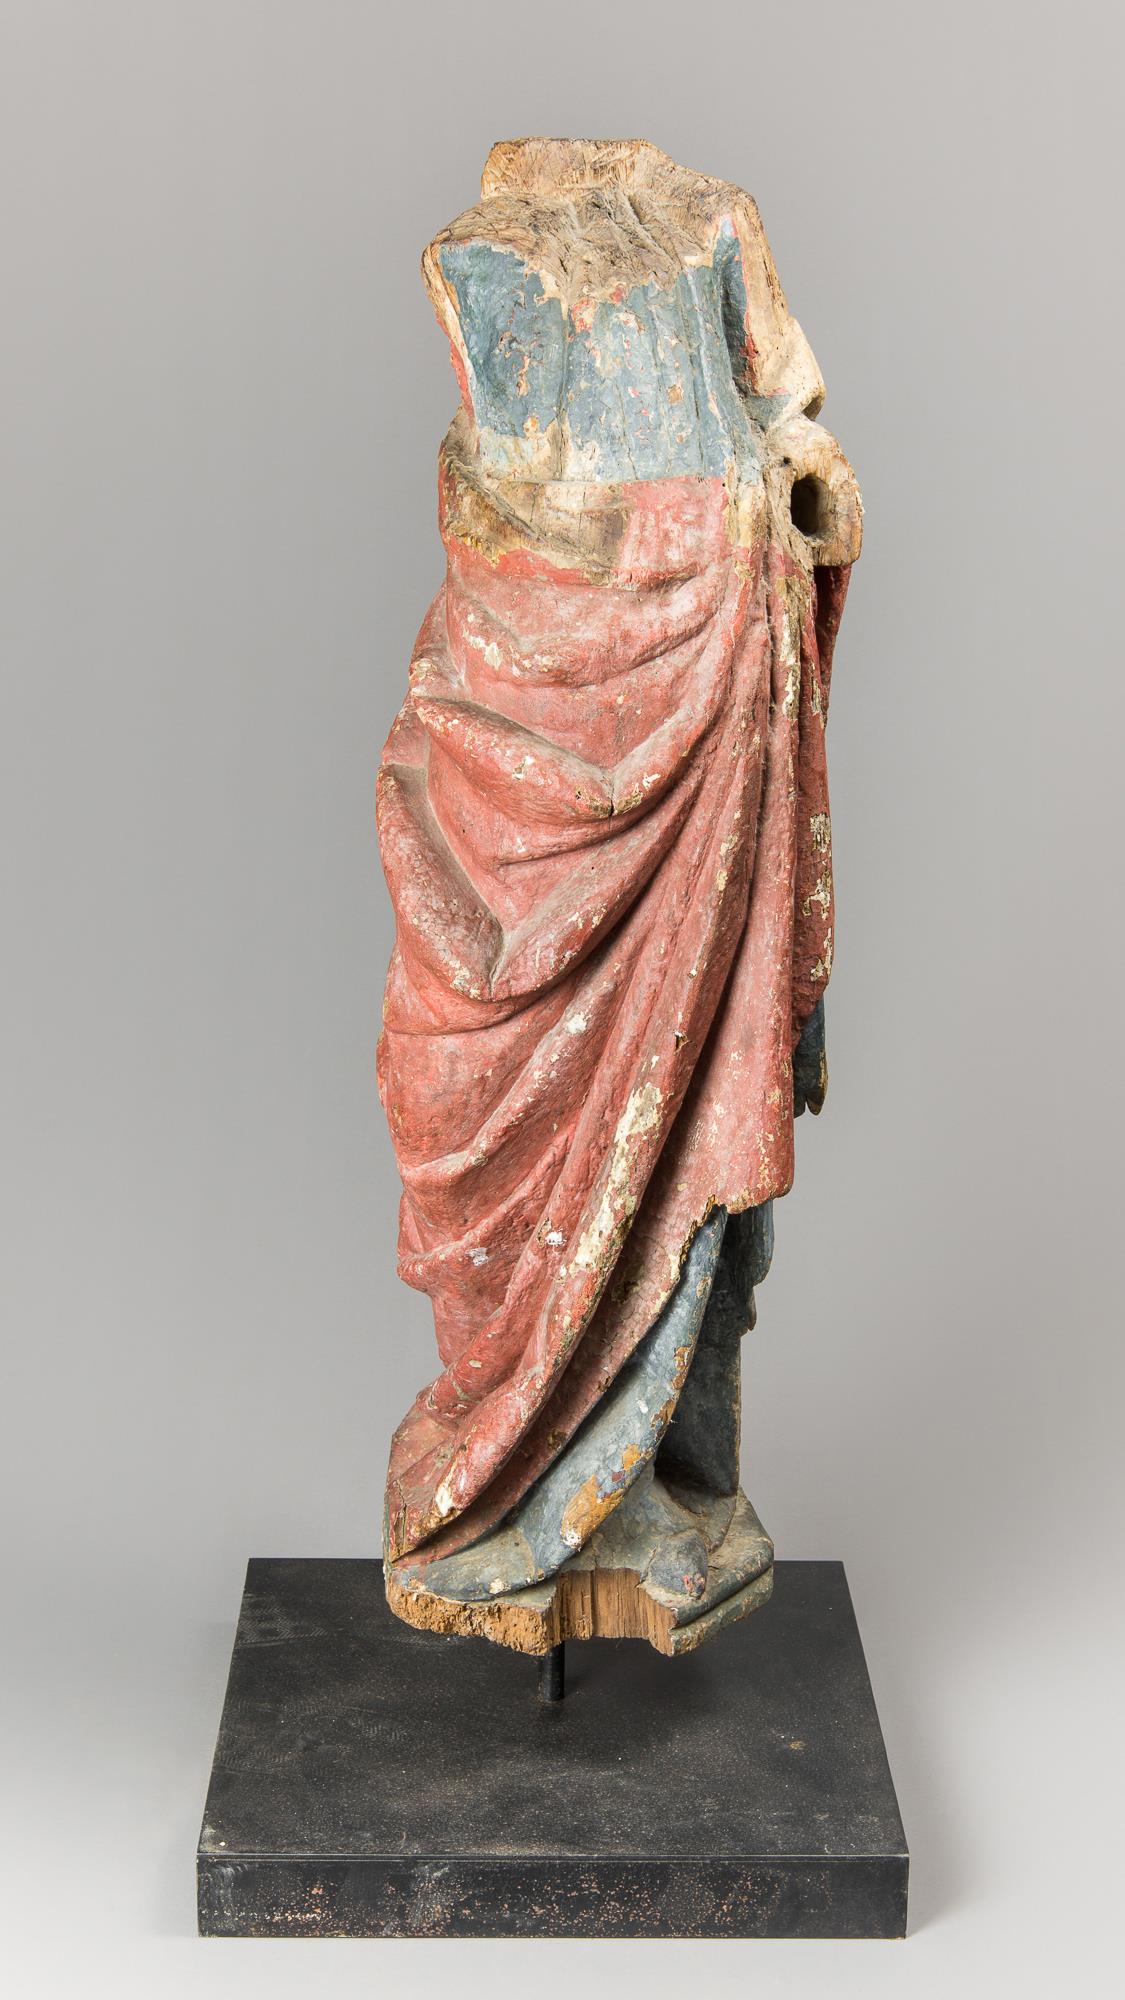 A LARGE CARVED WOOD POLYCHROME STATUE. Probably 15TH/16TH CENTURY, ITALY. On a custom stand. (h